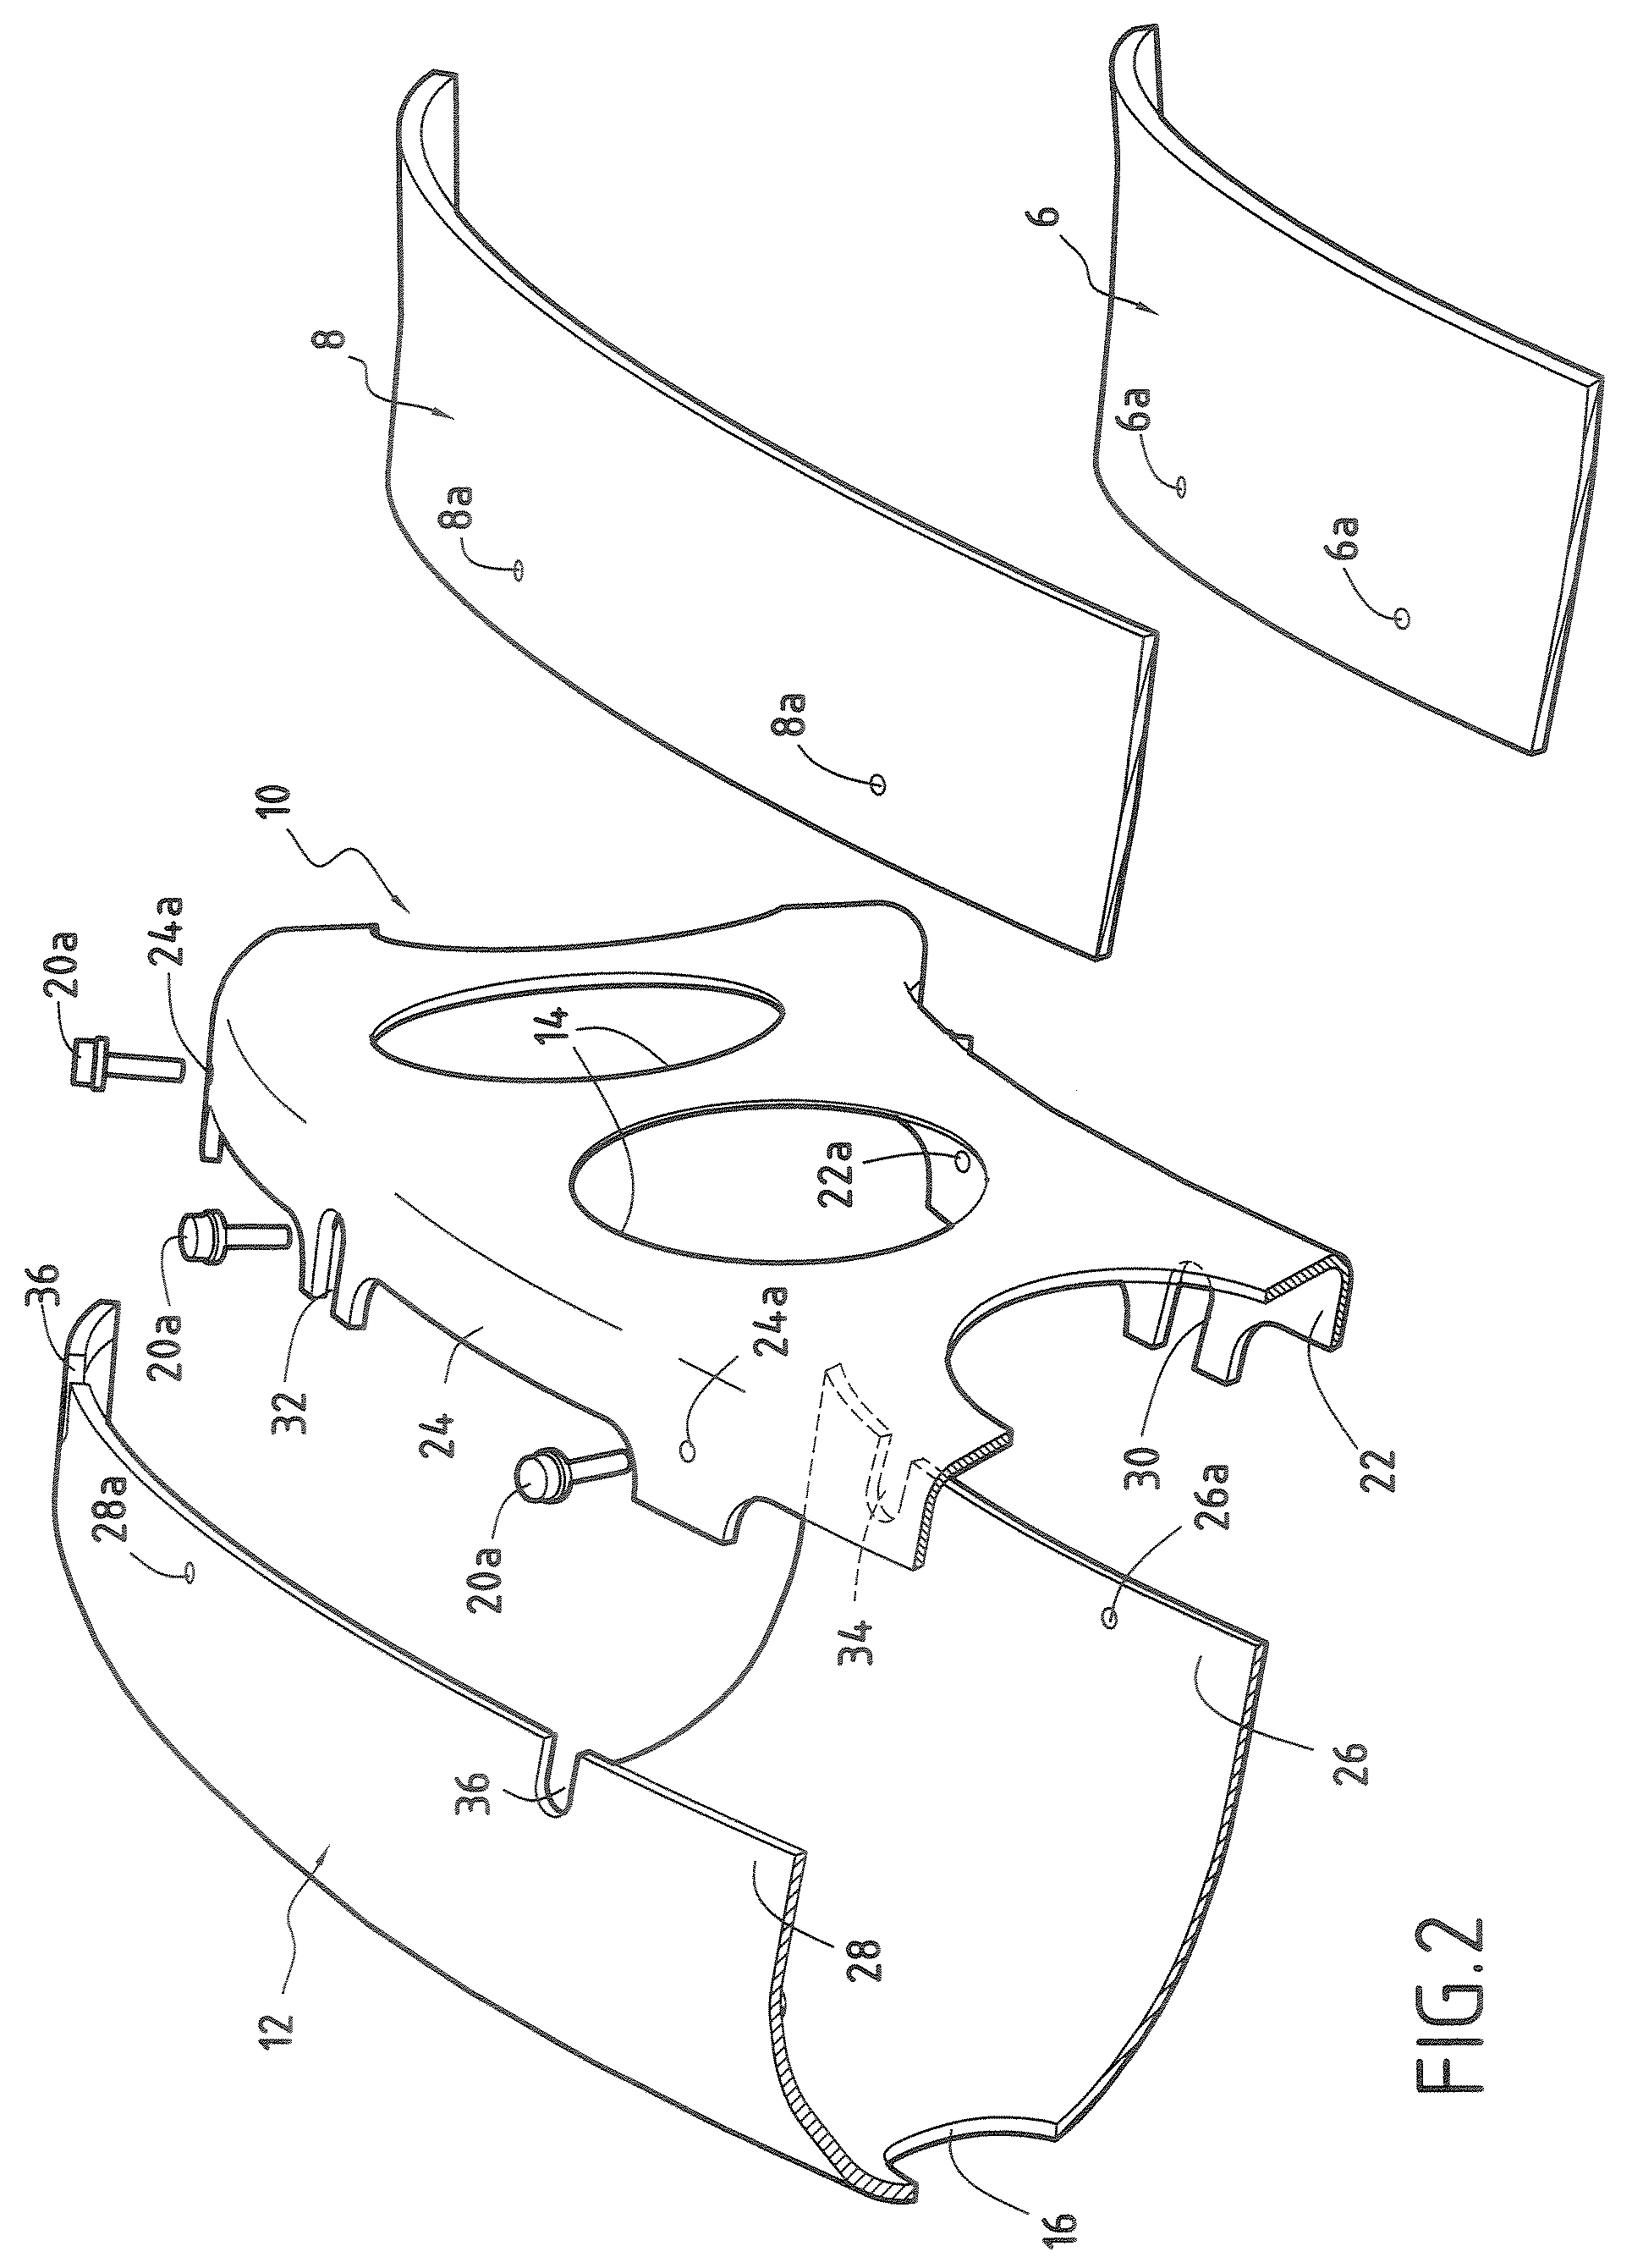 Turbine engine annular combustion chamber with alternate fixings